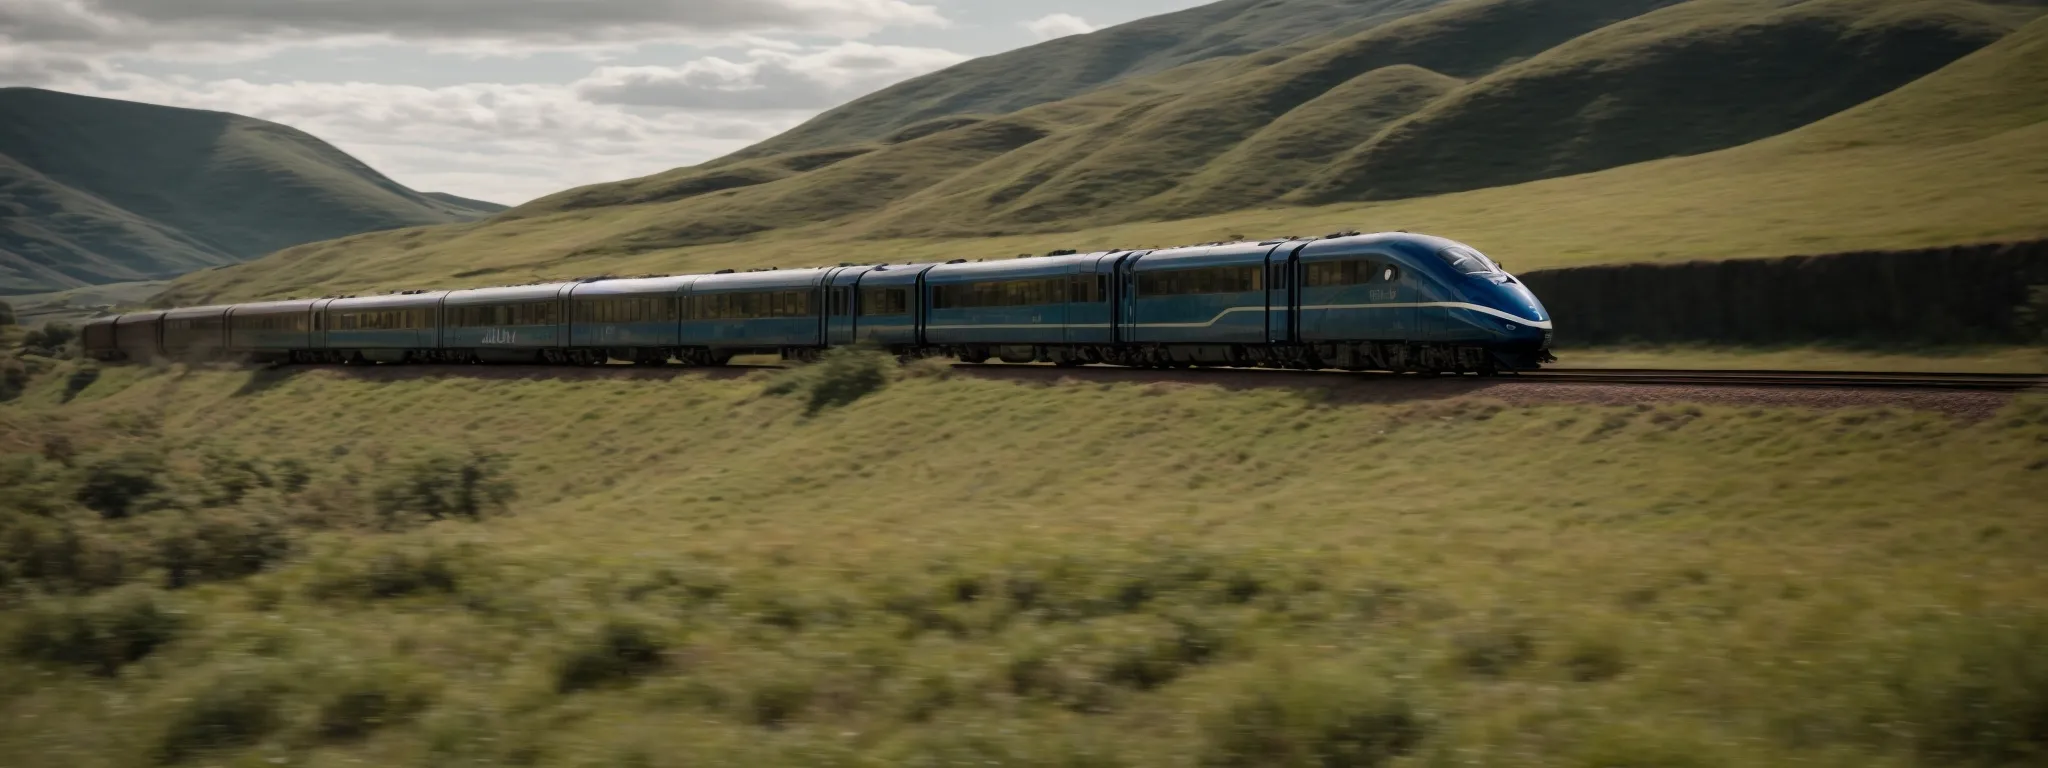 a streamlined train swiftly cutting through a landscape, signifying speed, with a solid, opaque tunnel in the background, illustrating security.